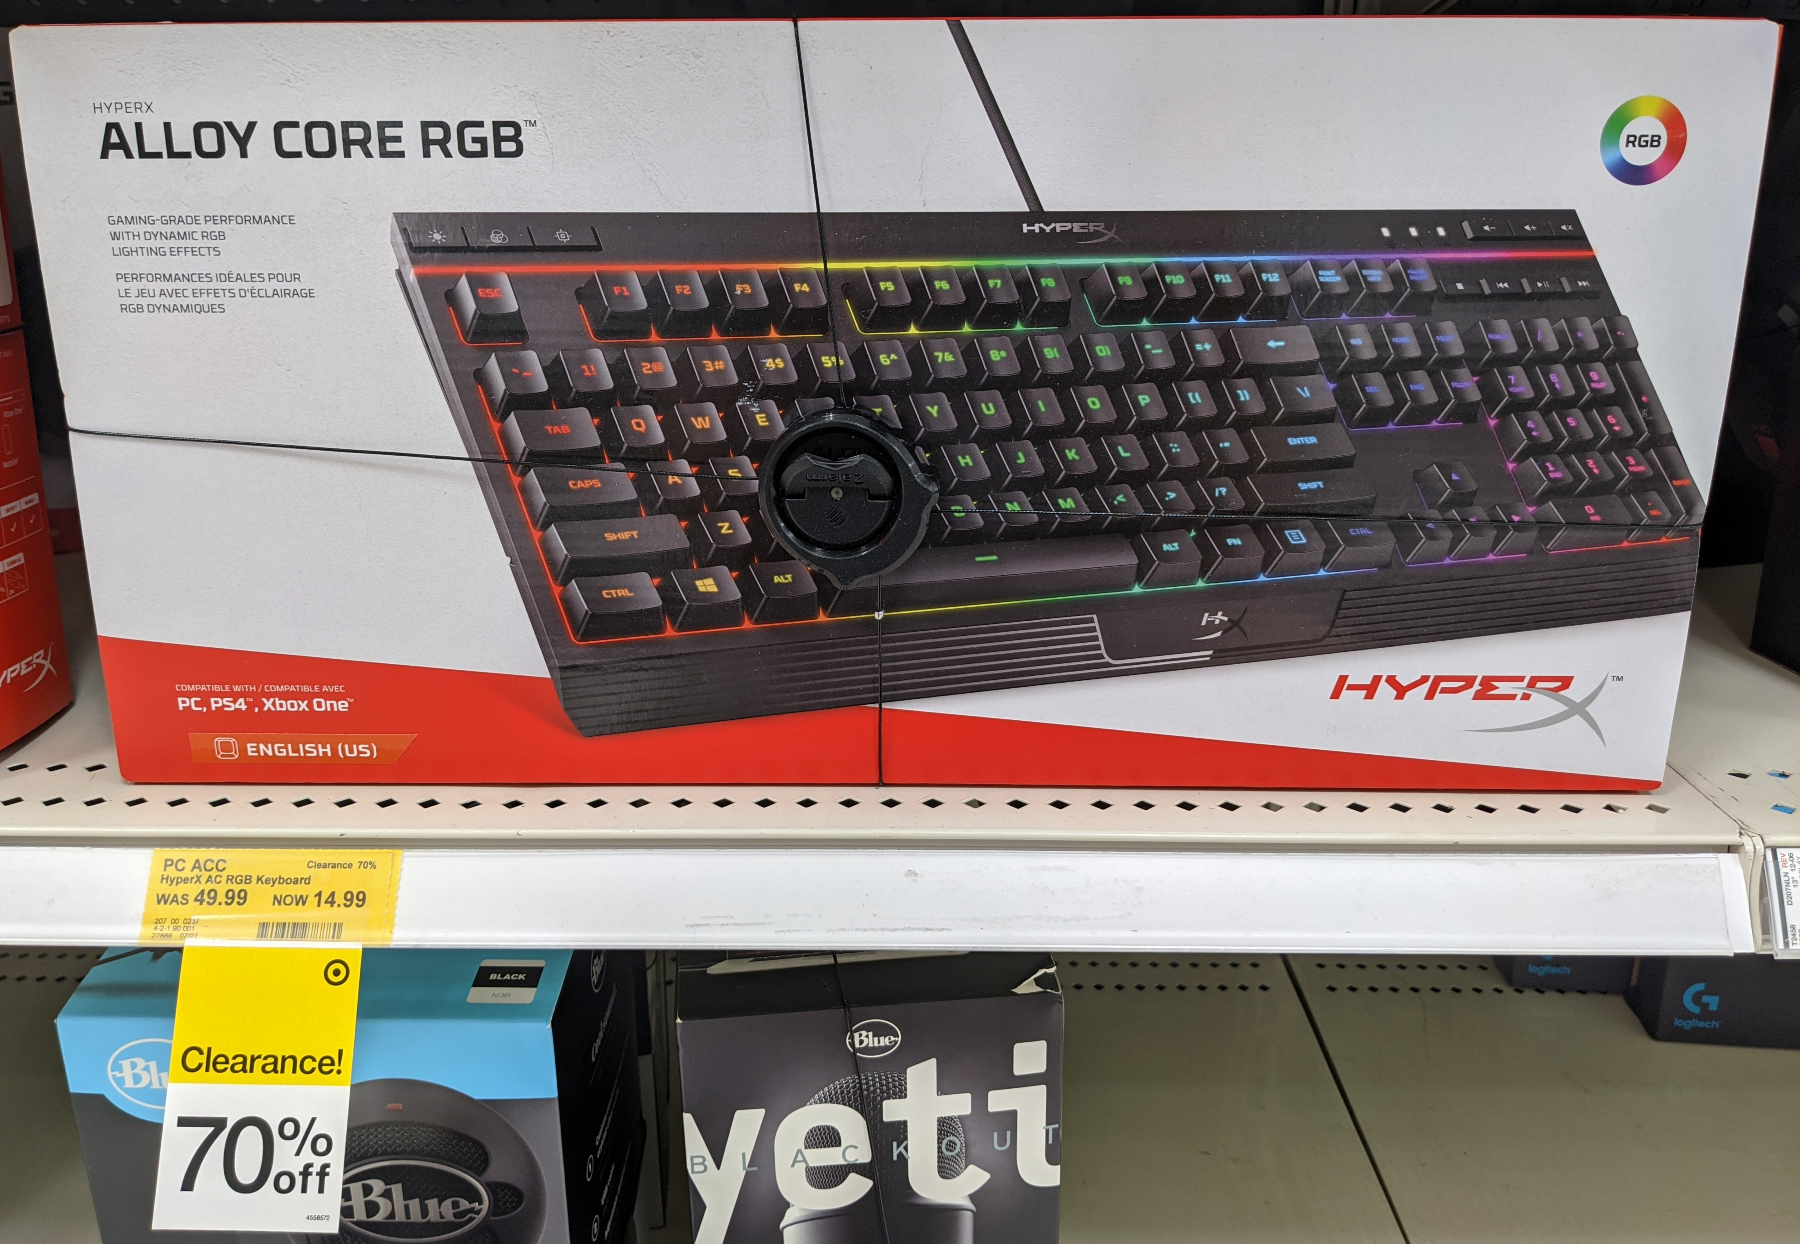 HyperX Alloy Core RGB Membrane Gaming Keyboard $14.99 Clearance at Target YMMV